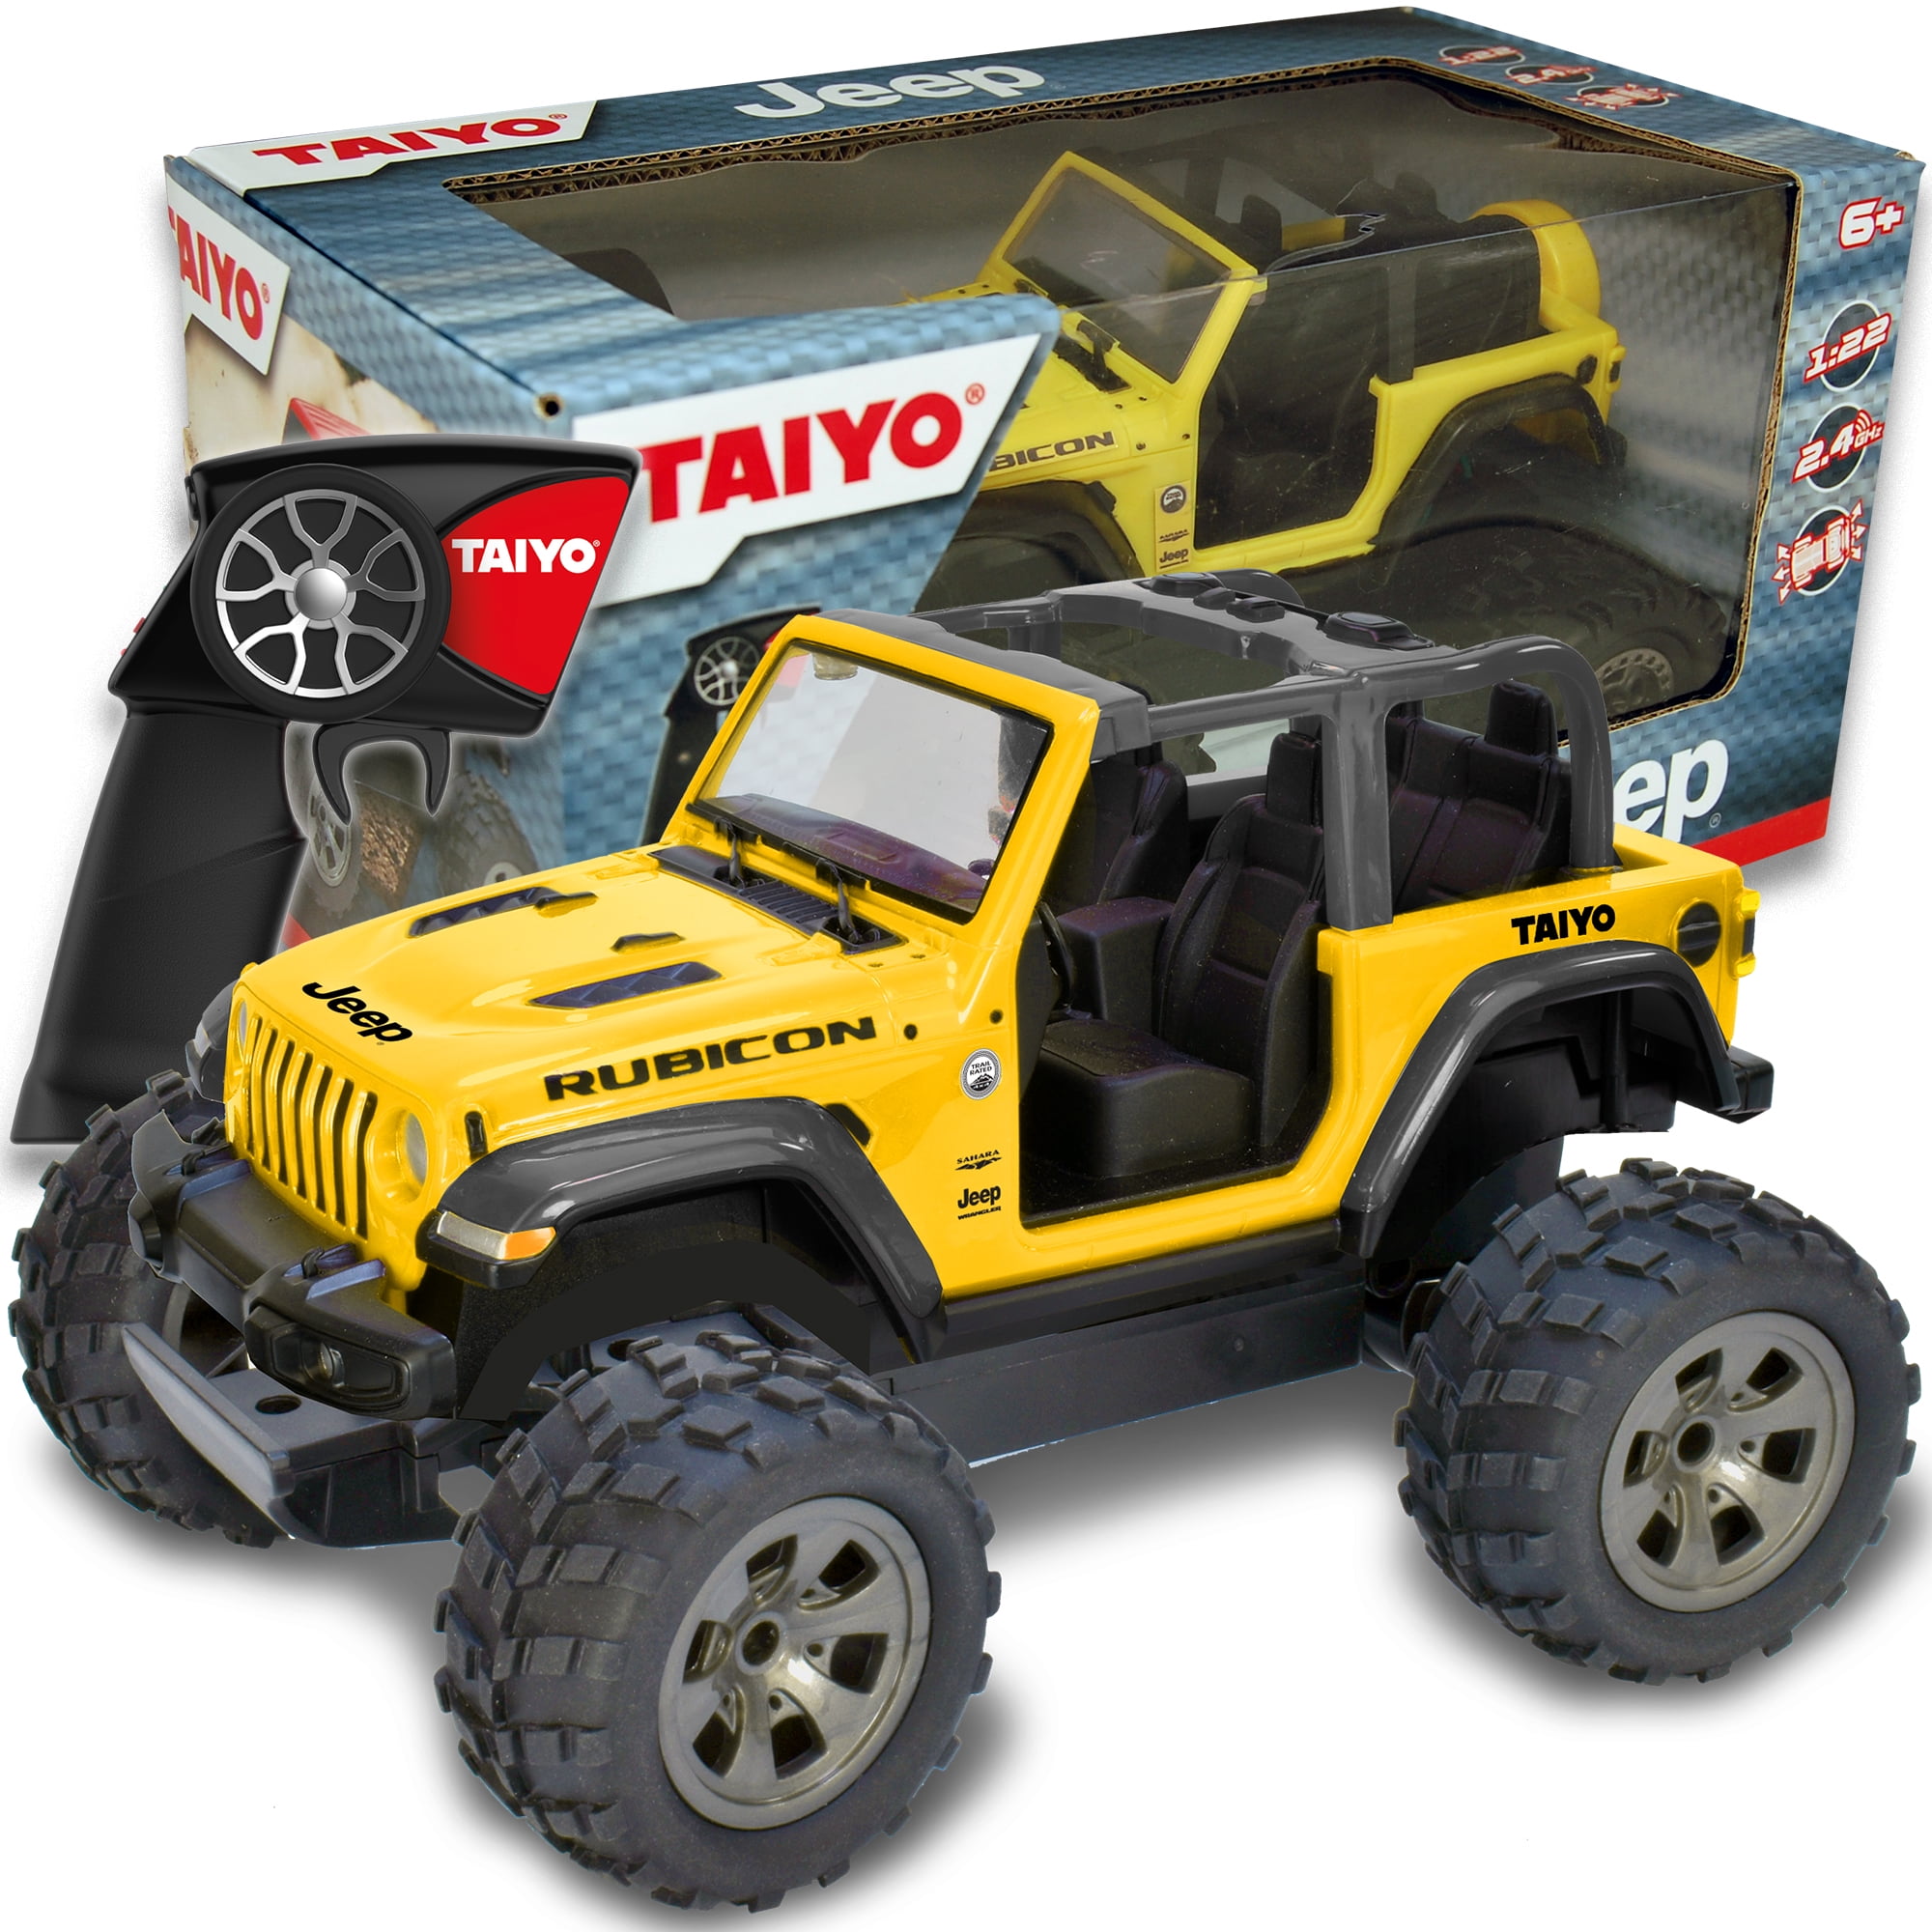 Nikko R/C Remote Controlled 1-18 Scale Off-Road Truck Jeep Wrangler Kids Toy